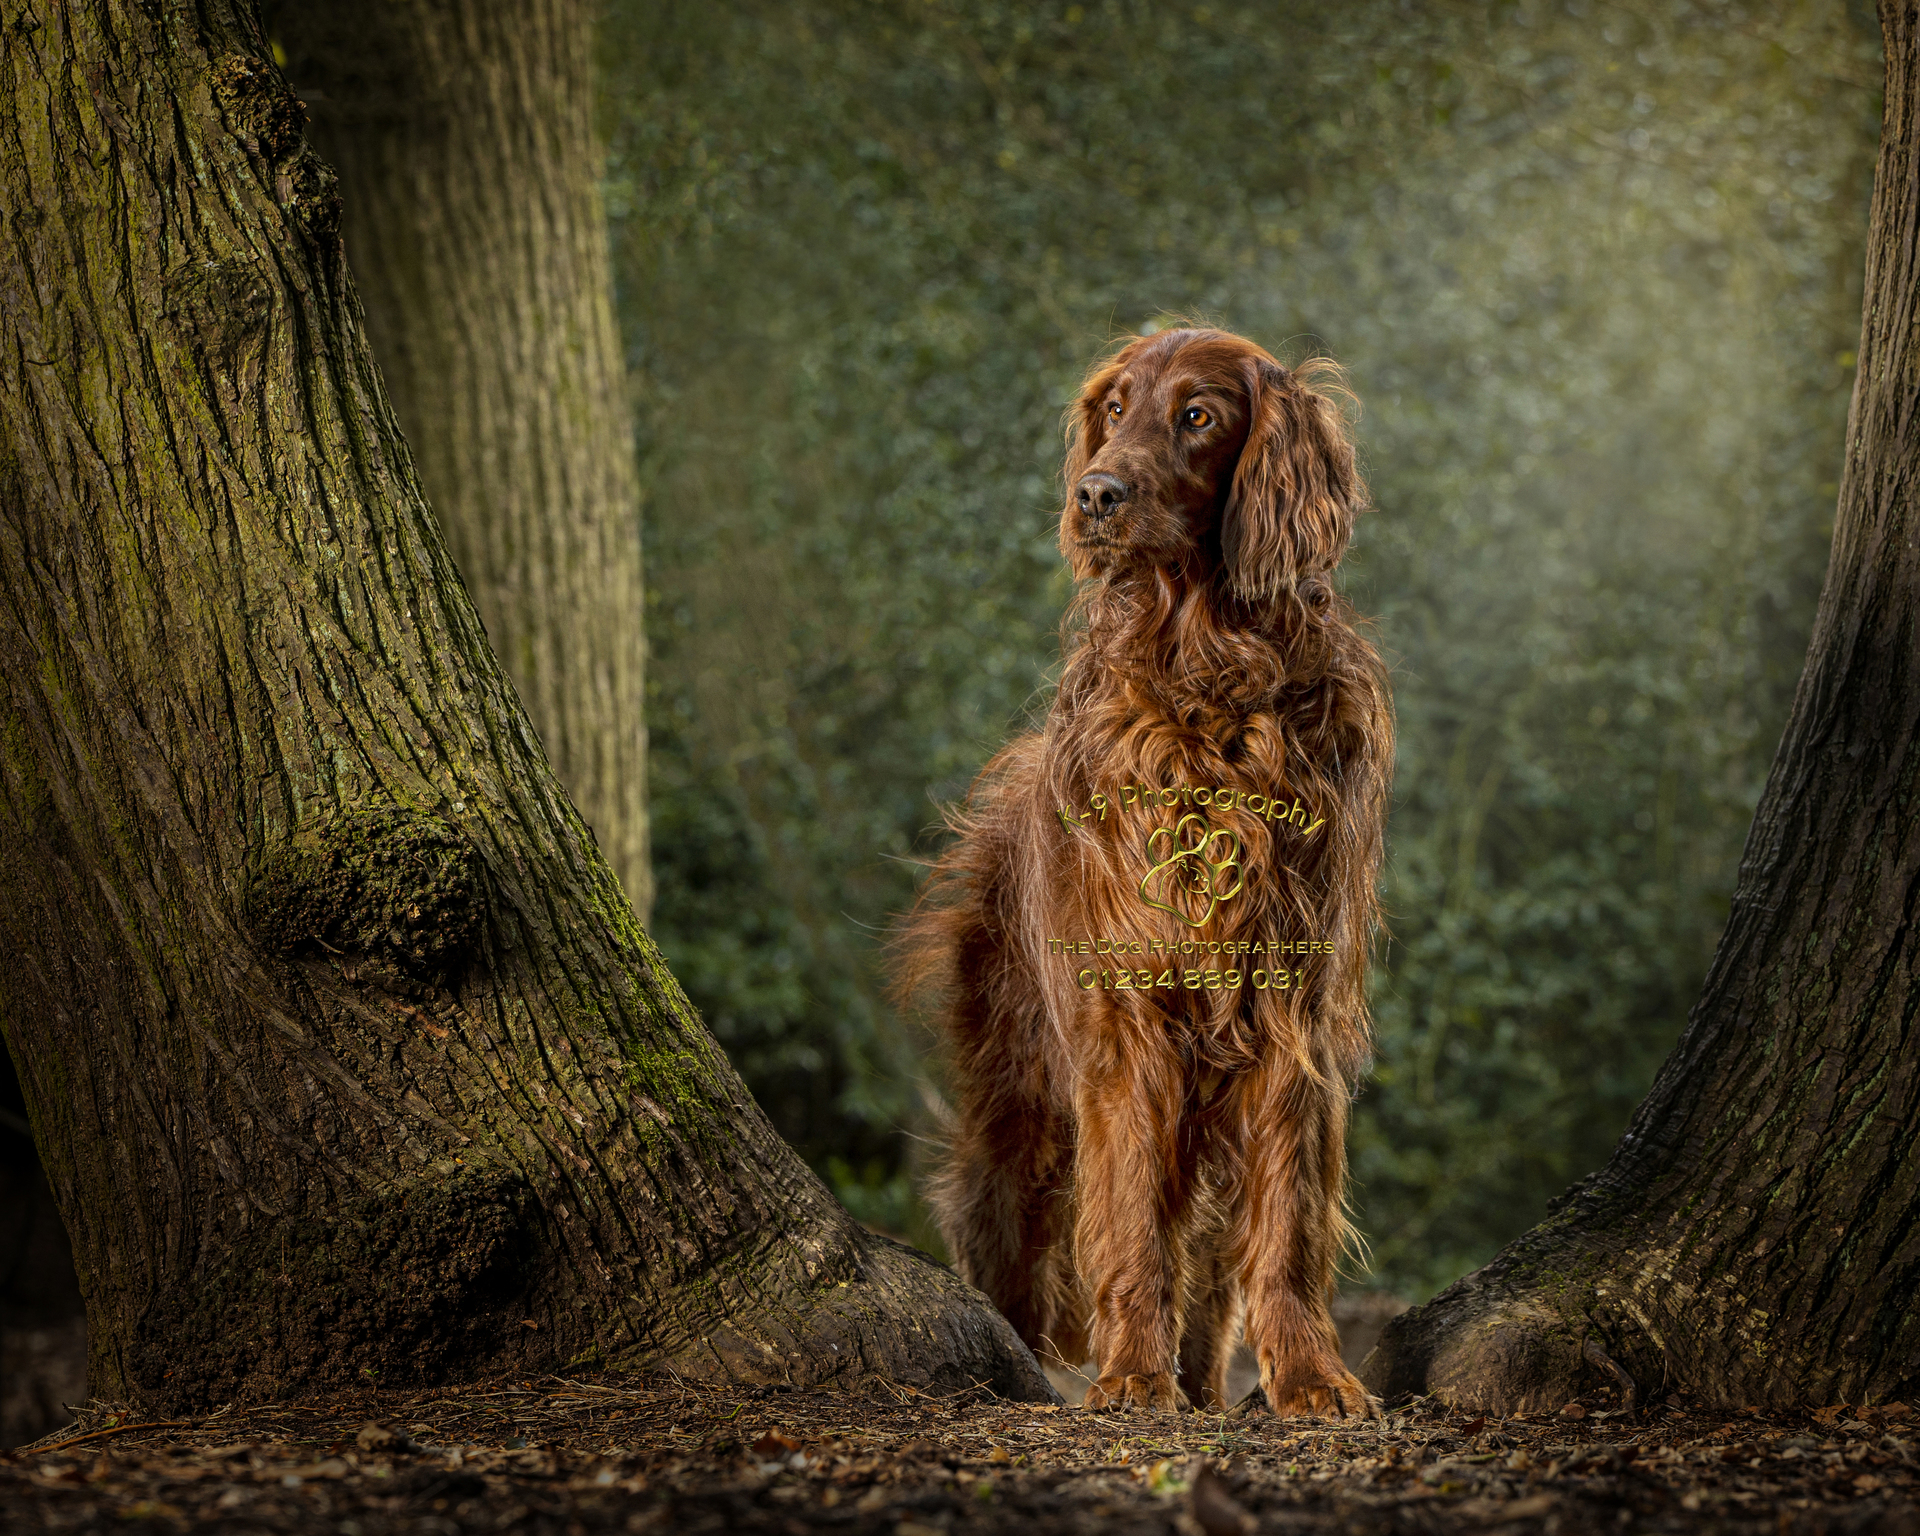 Expert advice for capturing better photos of your canine companion